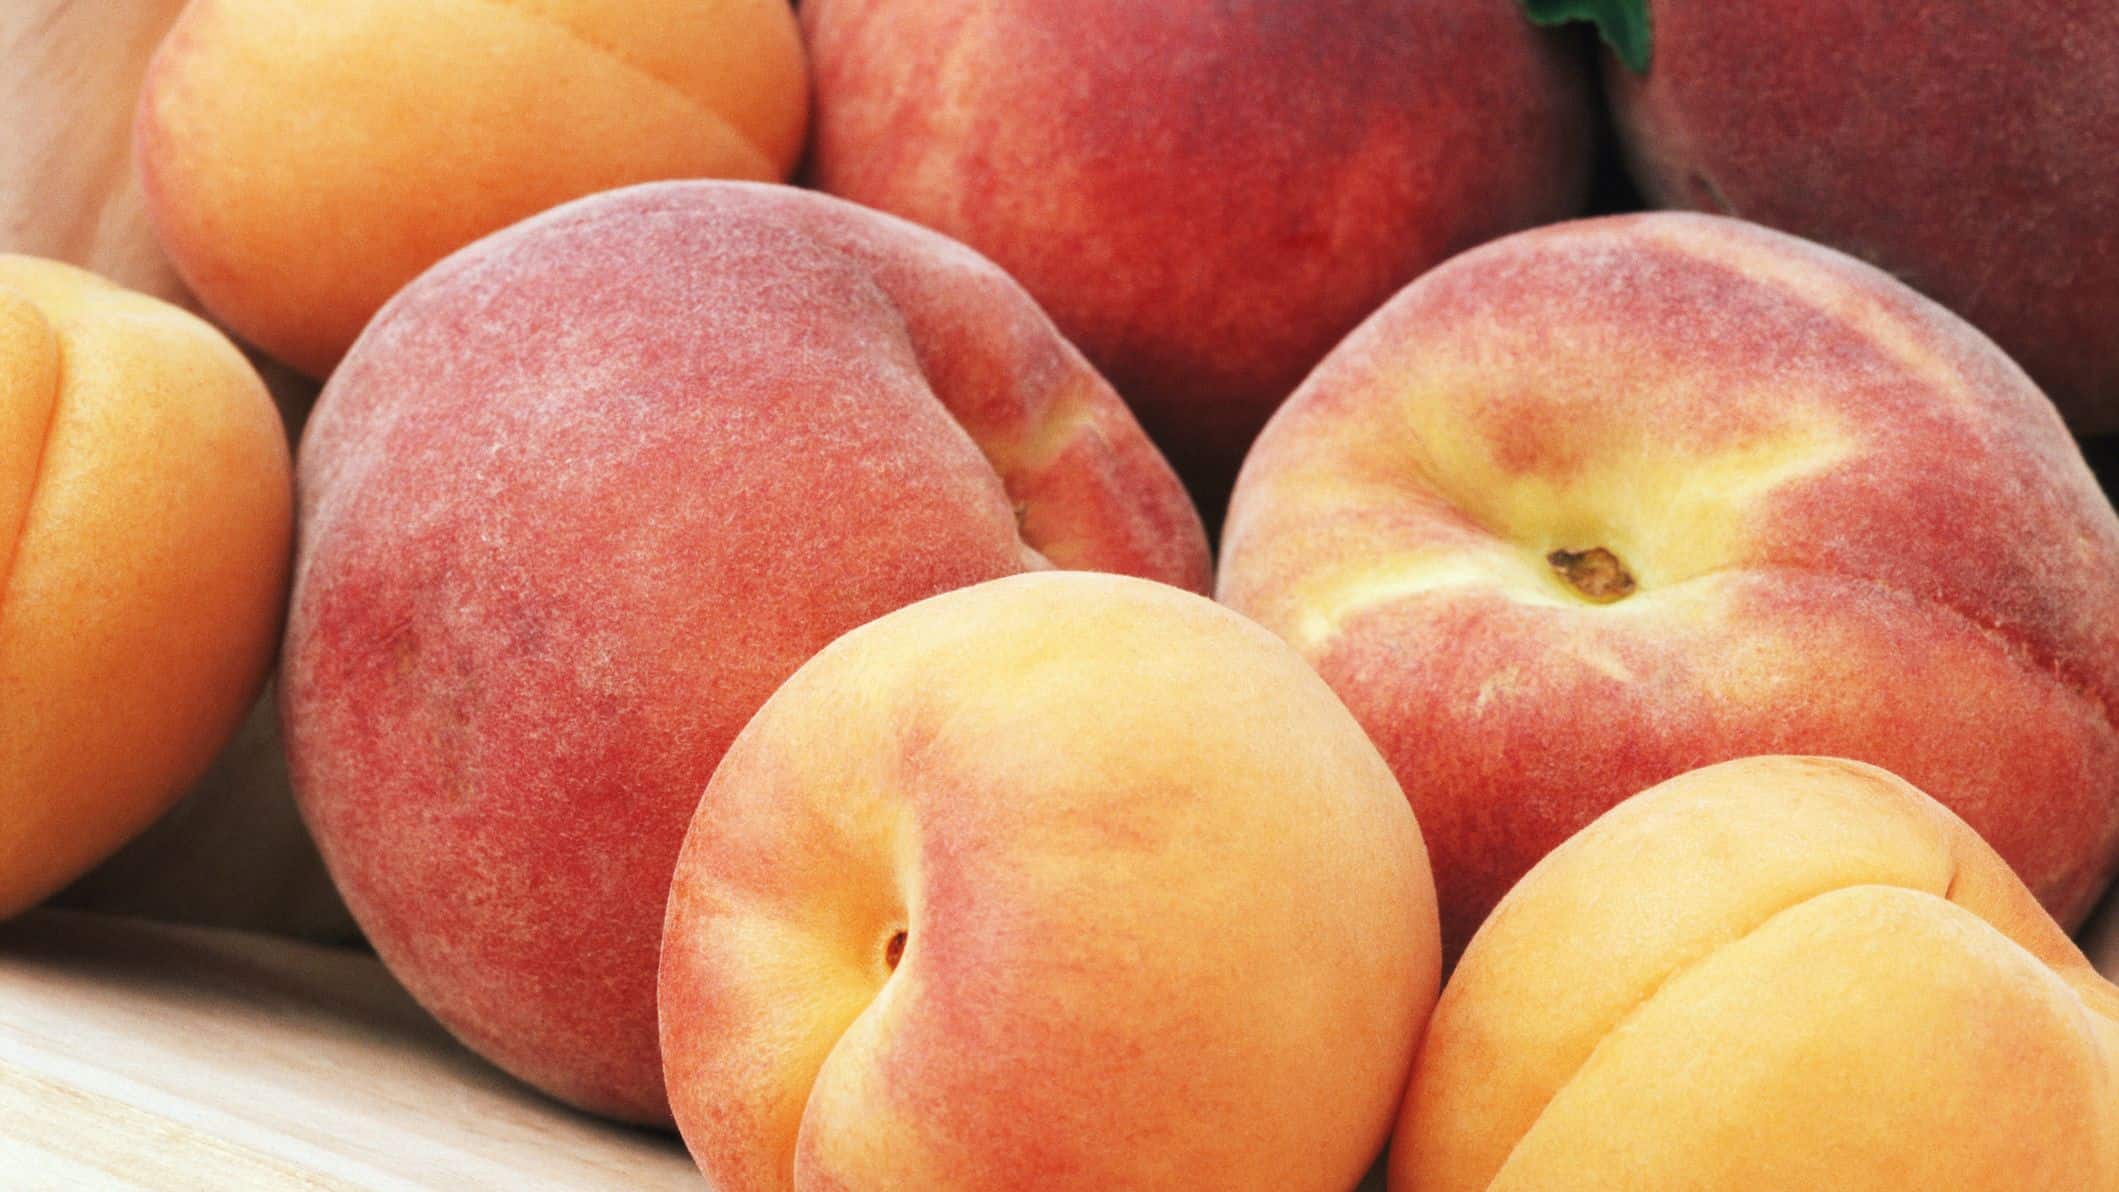 peach fruit properties on skin beauty, treatment of diseases, and slimming